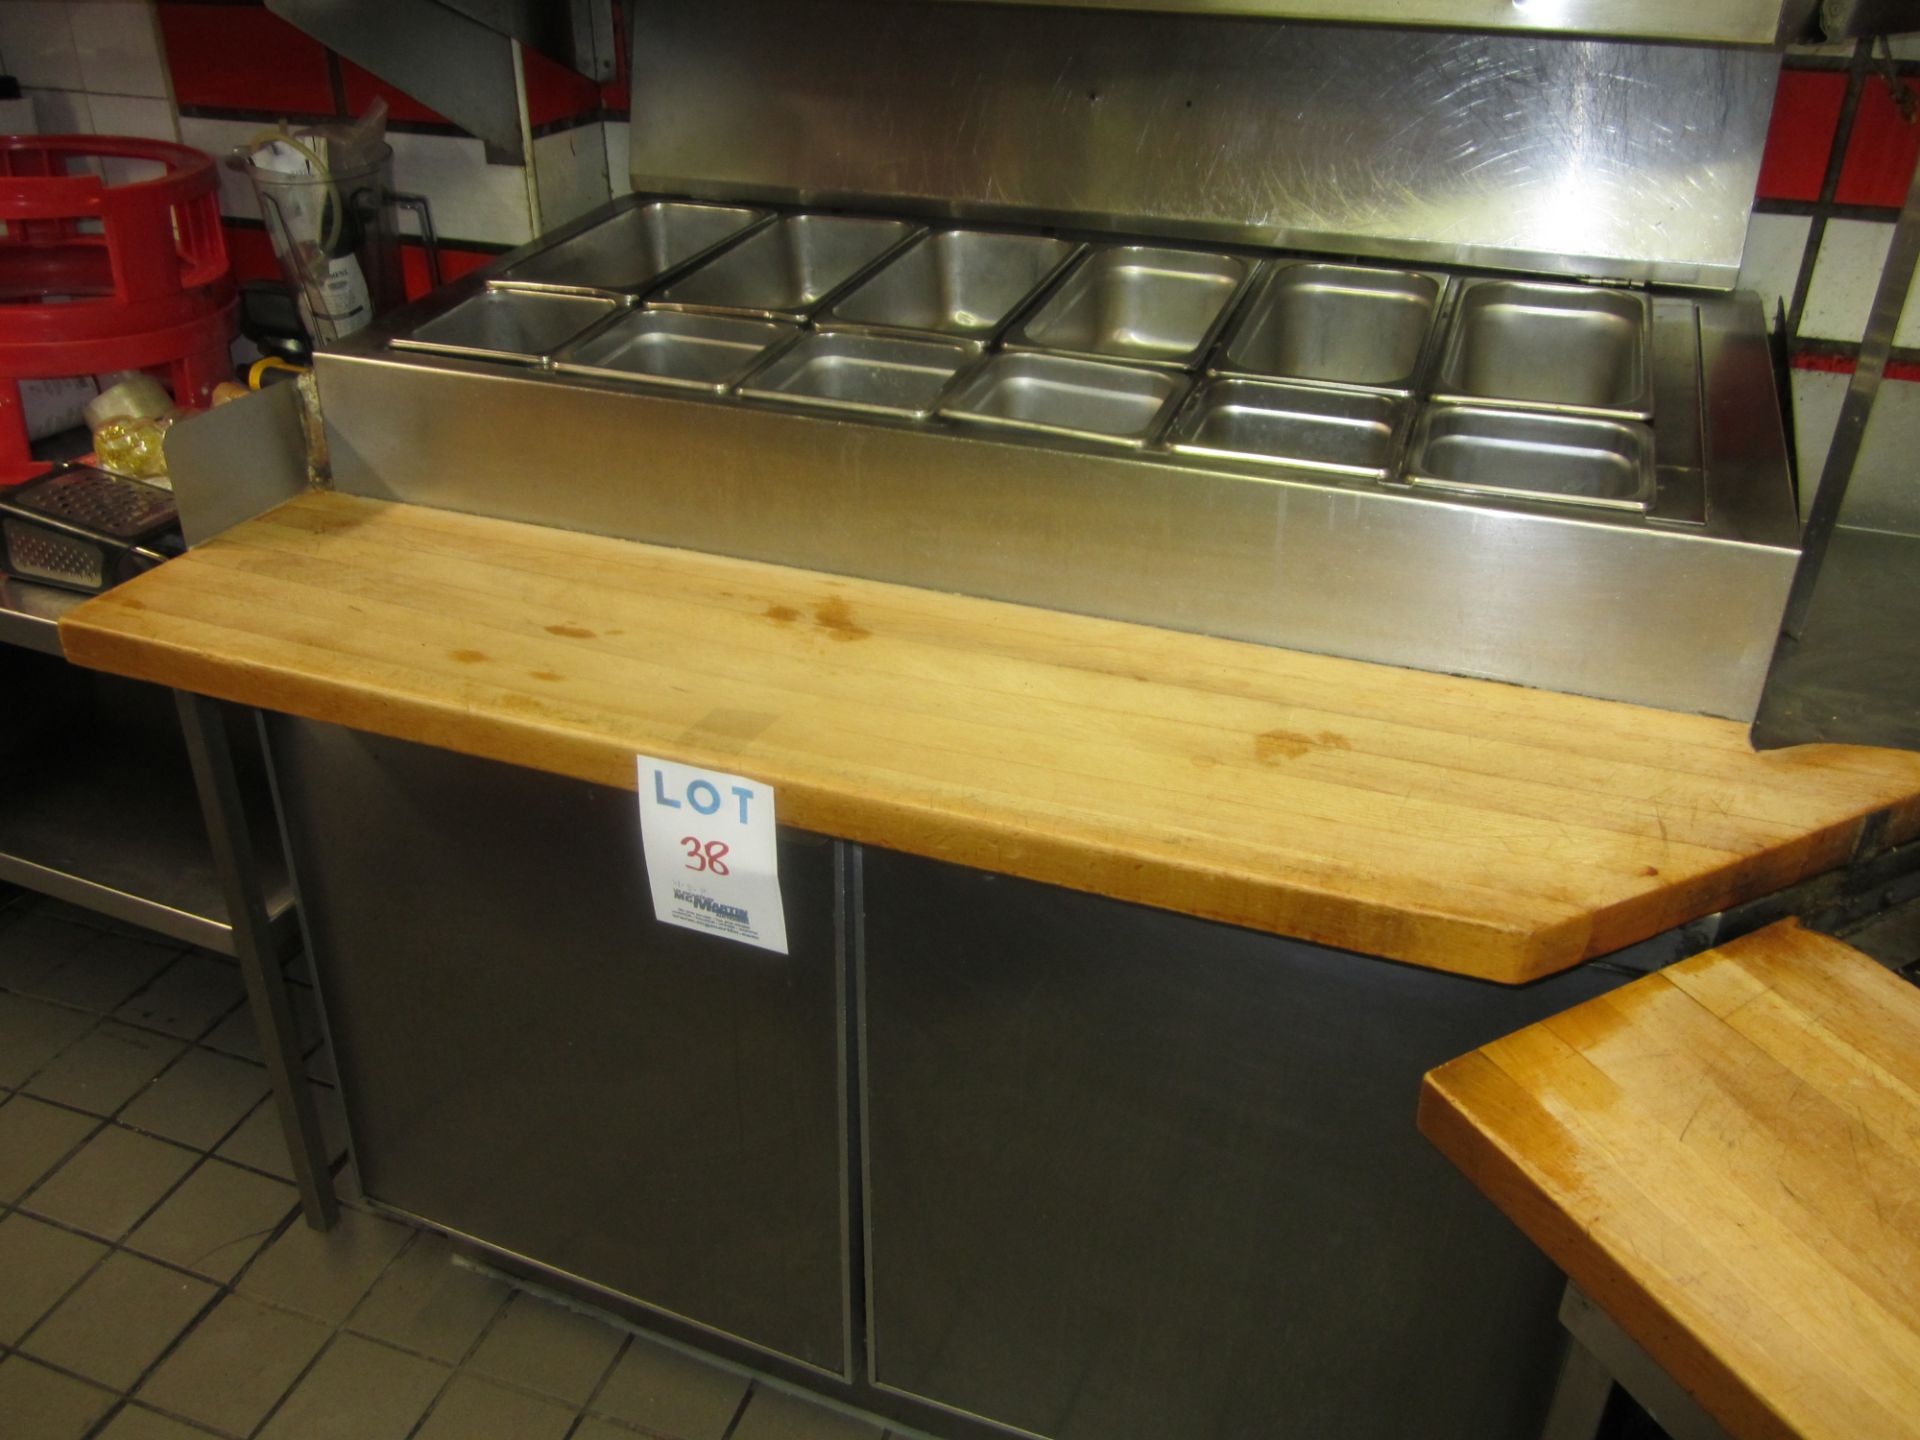 STAINLESS STEEL REFRIGERATED 2-DOOR UNIT/ PREPERATION TABLE 48'' WIDE X 30'' DEEP X 37'' HIGH